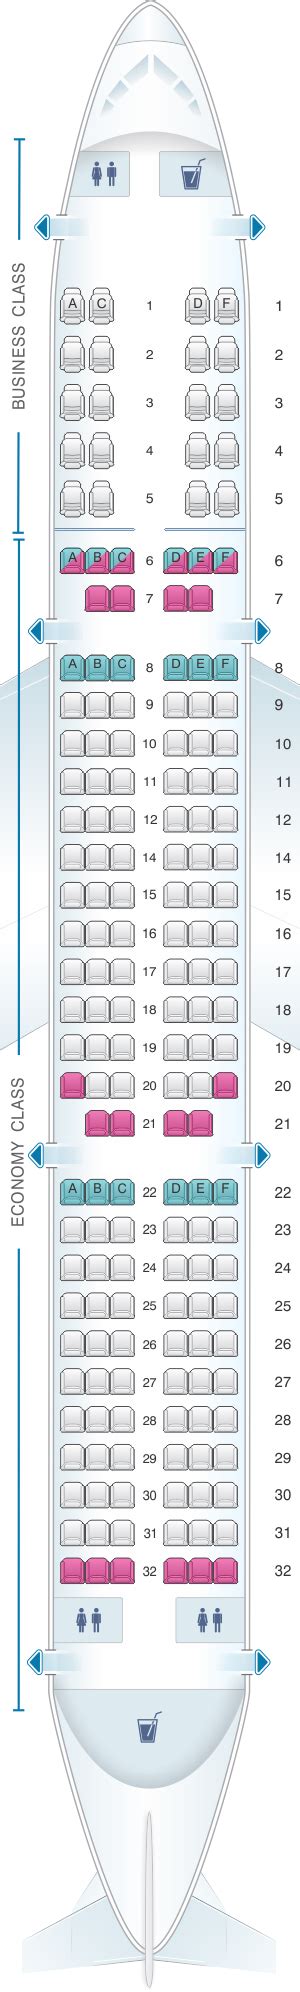 Flight seat map air india. Be the first to write a review! Detailed seat map Air India ATR 42 320. Find the best airplanes seats, information on legroom, recline and in-flight entertainment using our detailed online seating charts. 